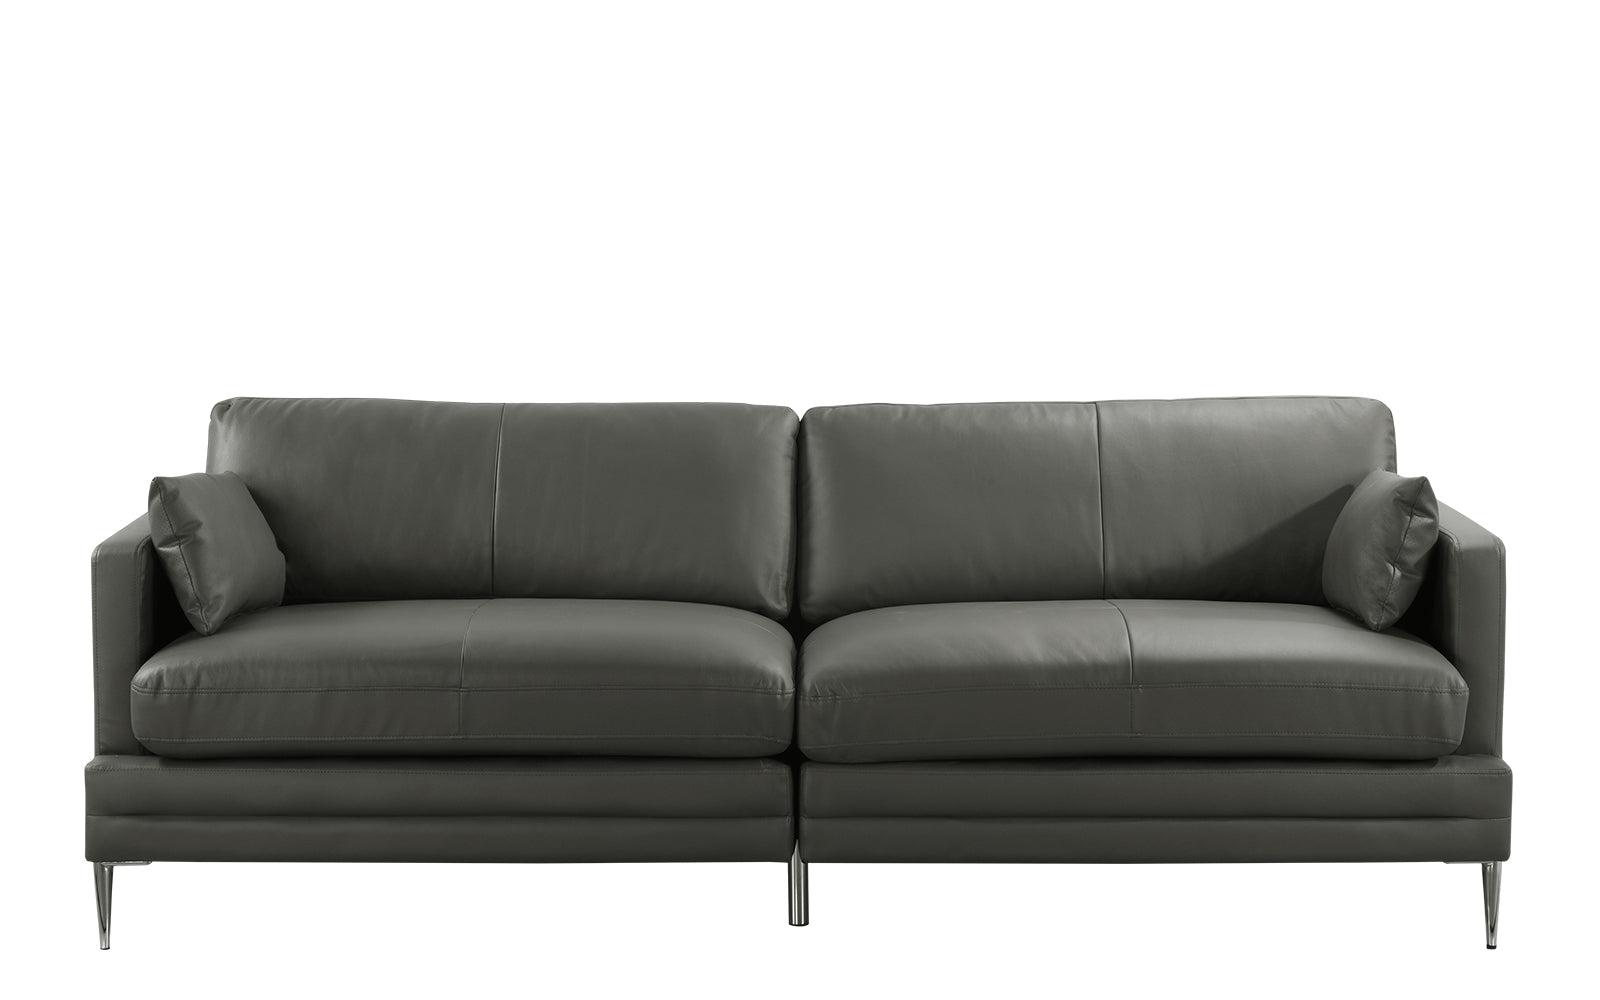 EXP303-GRY Hadrien Mid Century Modern Leather Match Sofa sku EXP303-GRY